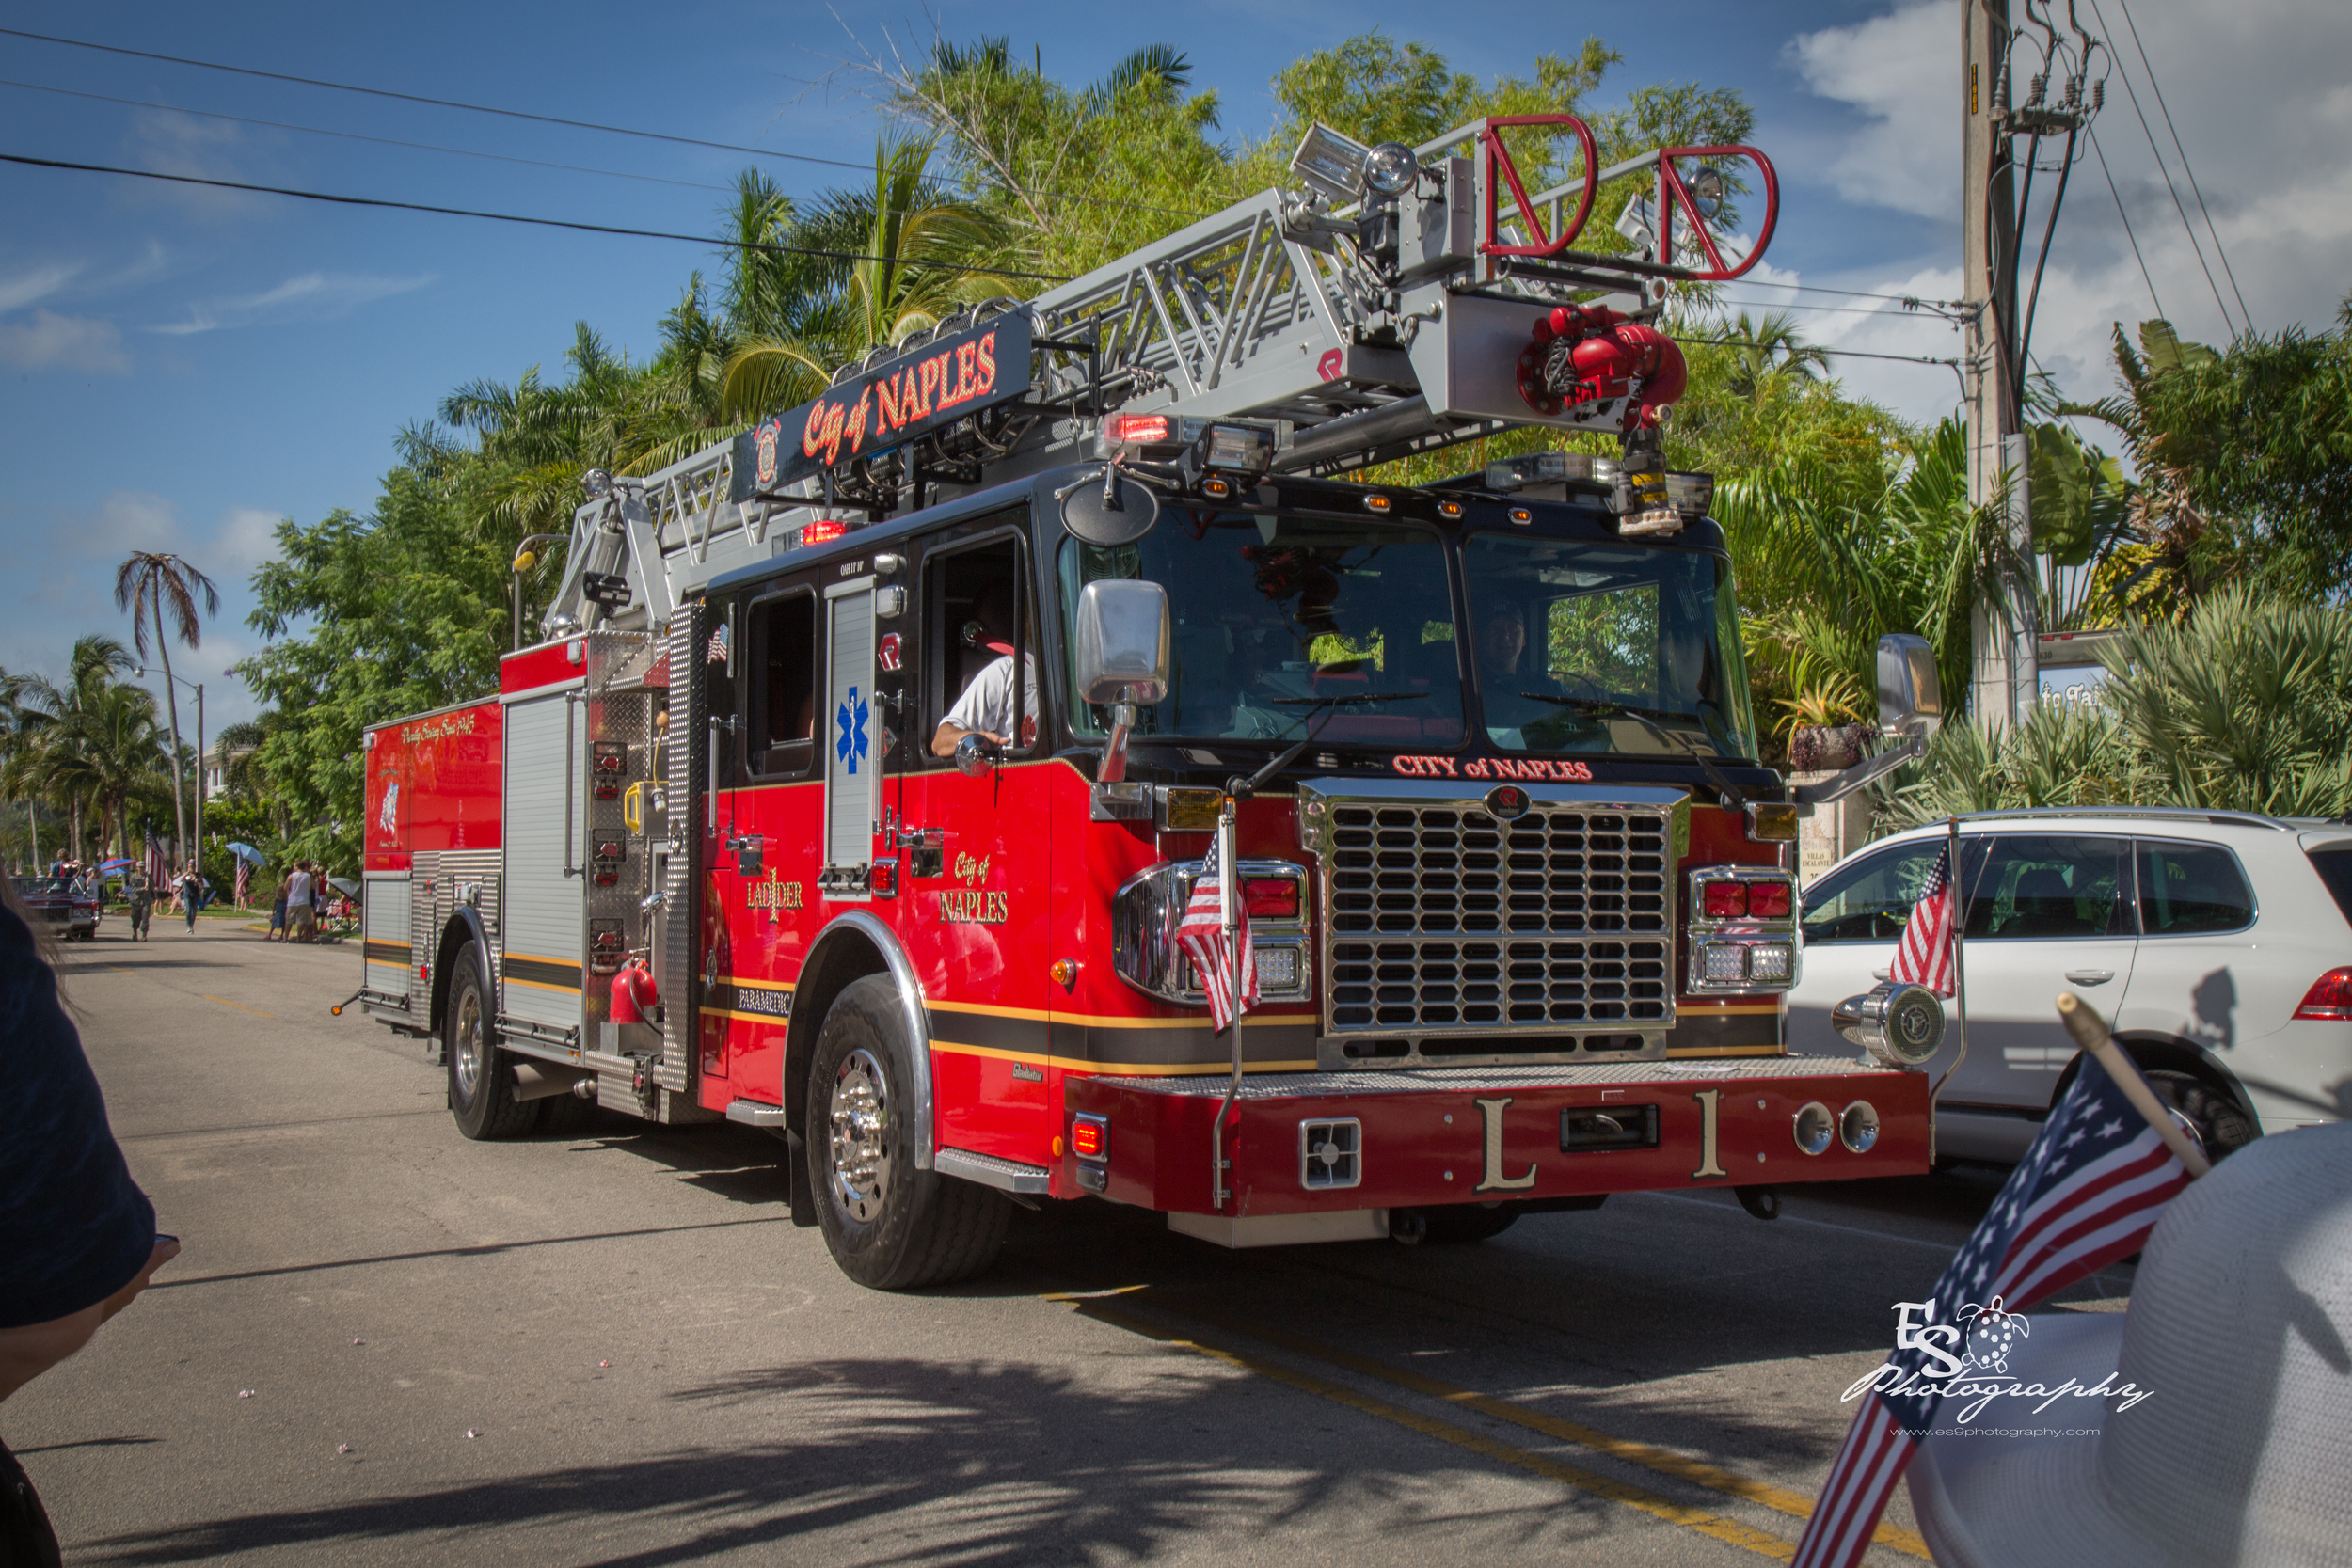 City of Naples July 4th Parade 2016 @ ES9 Photography 2016-4.jpg